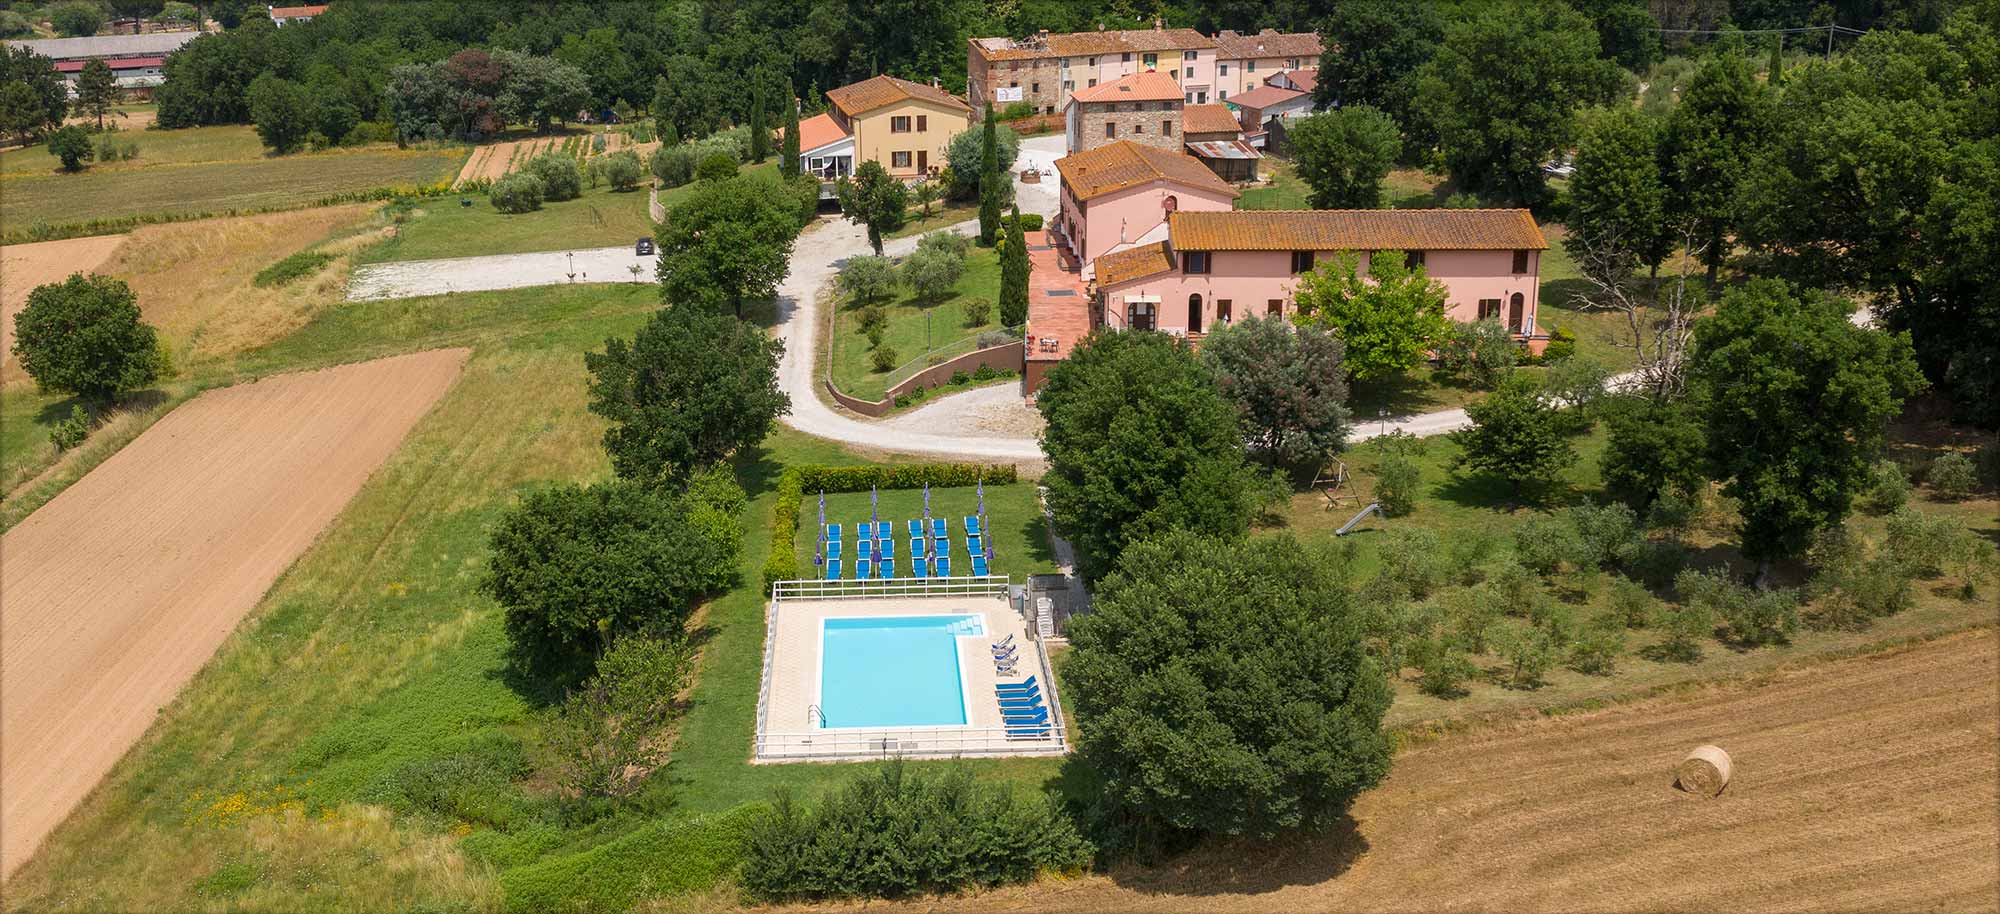 Corte Tommasi - Holiday apartments with swimming pool in Tuscany